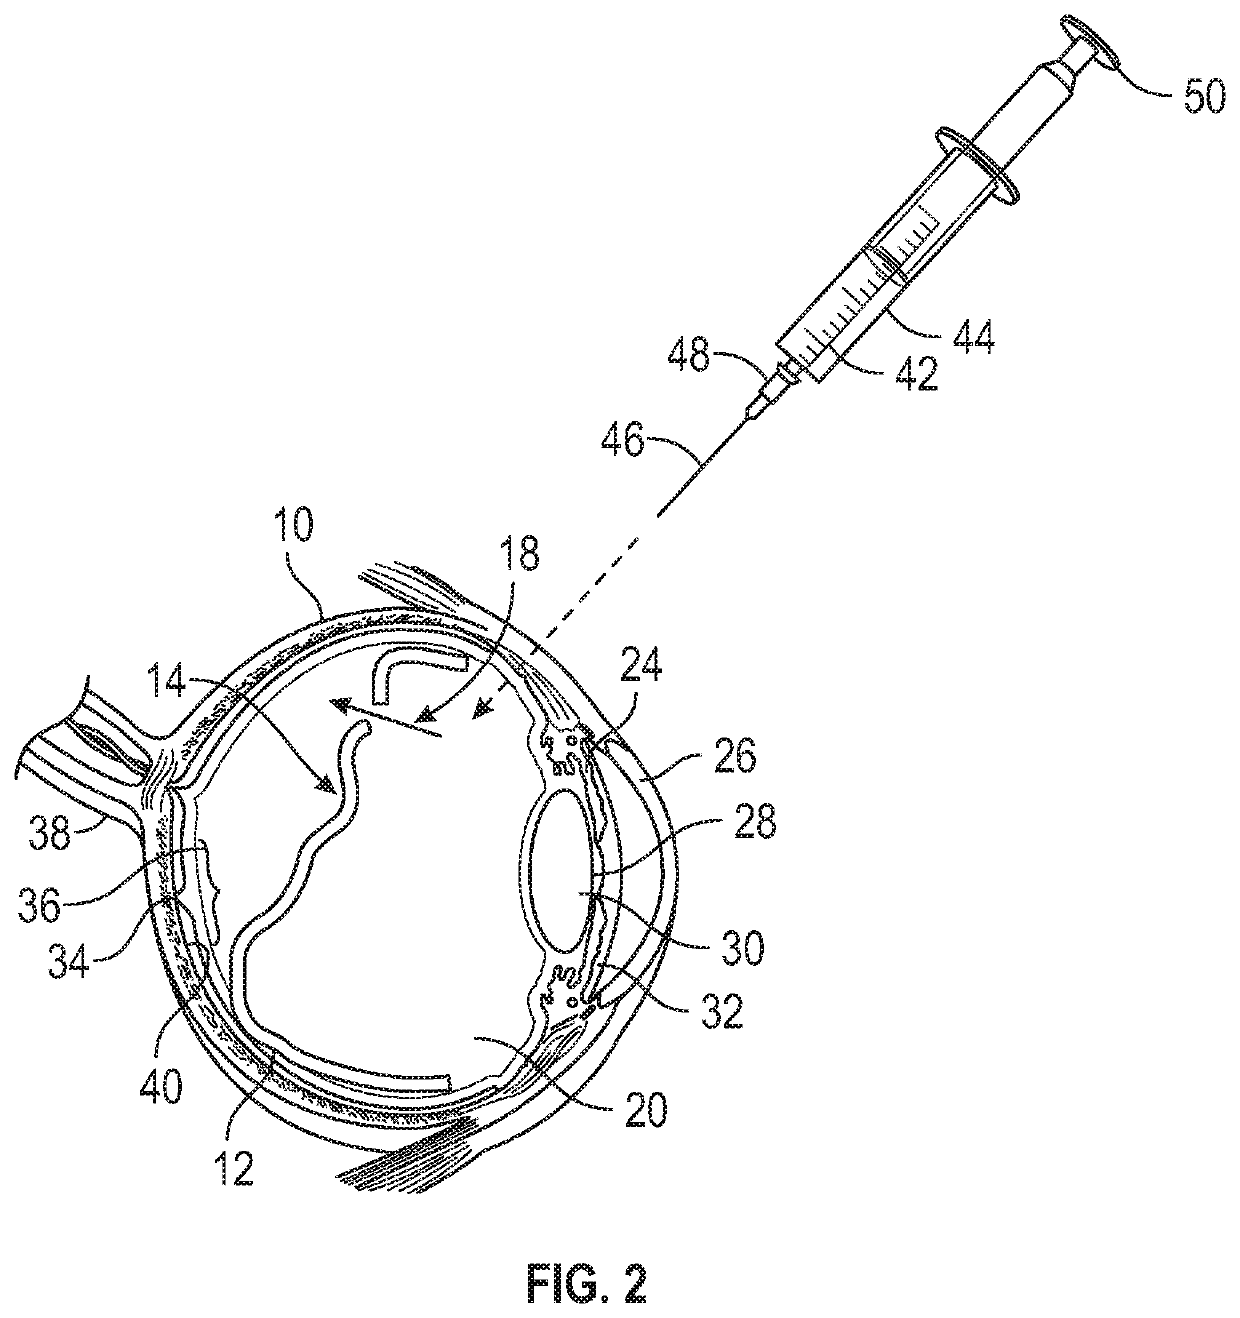 Methods and devices for treating a retinal detachment